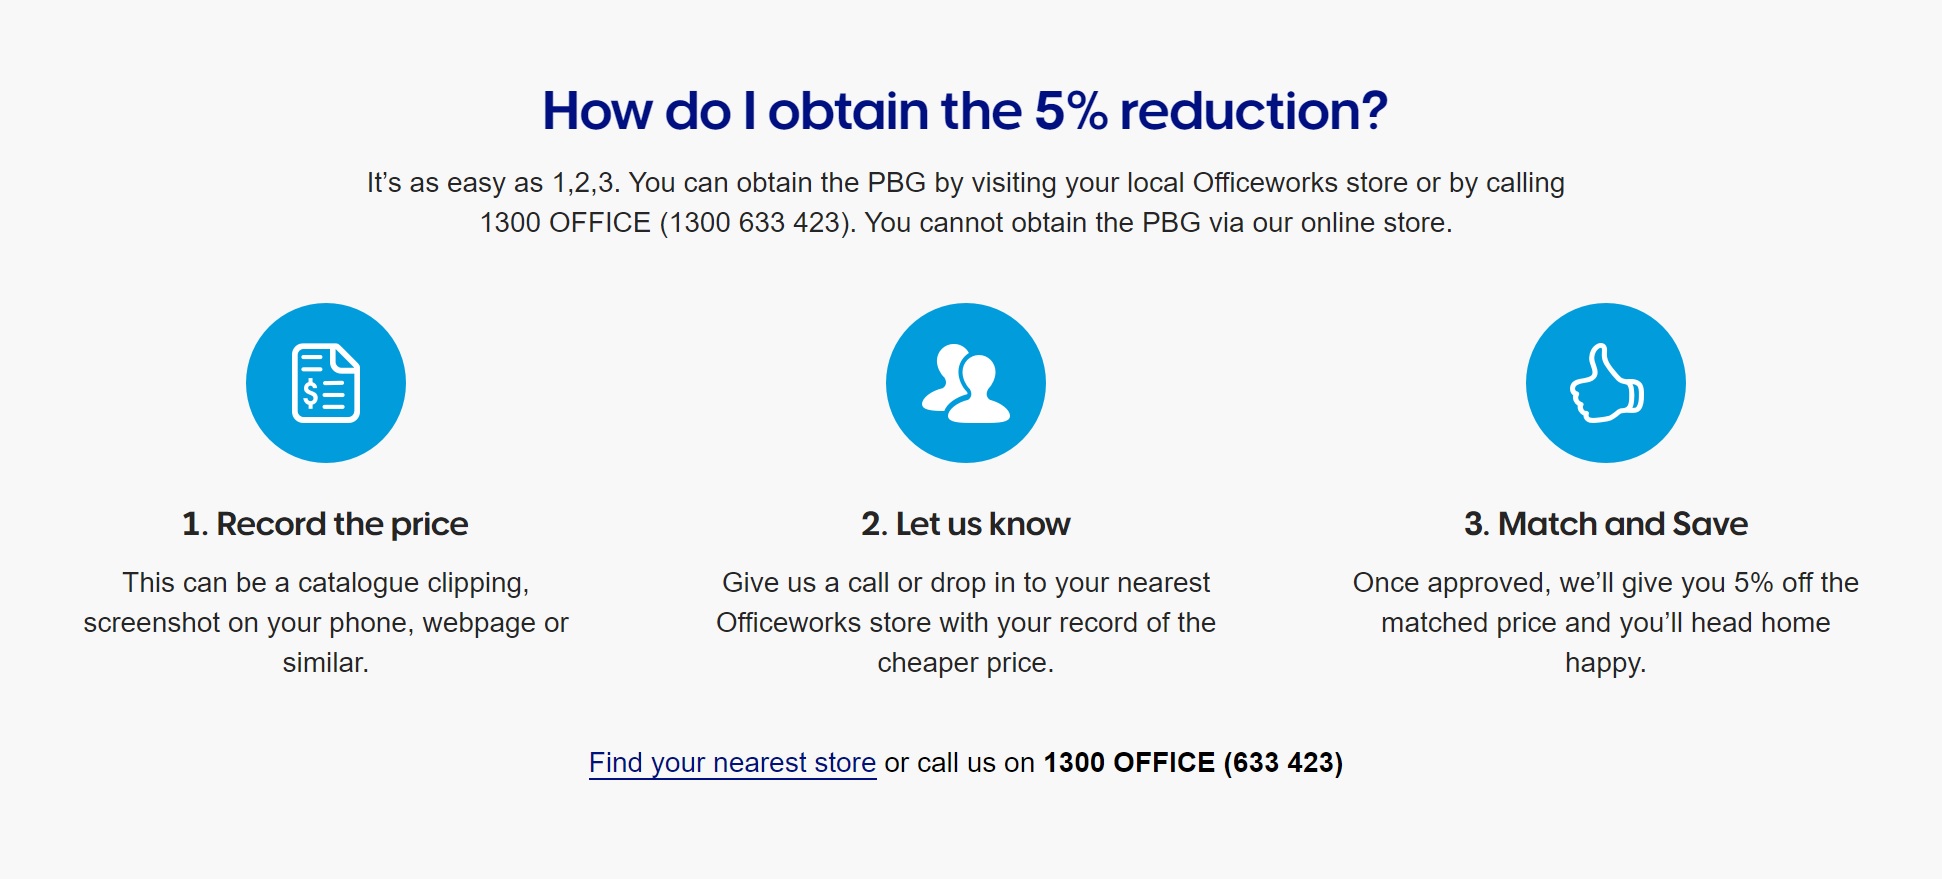 officeworks price match and 5% reduction